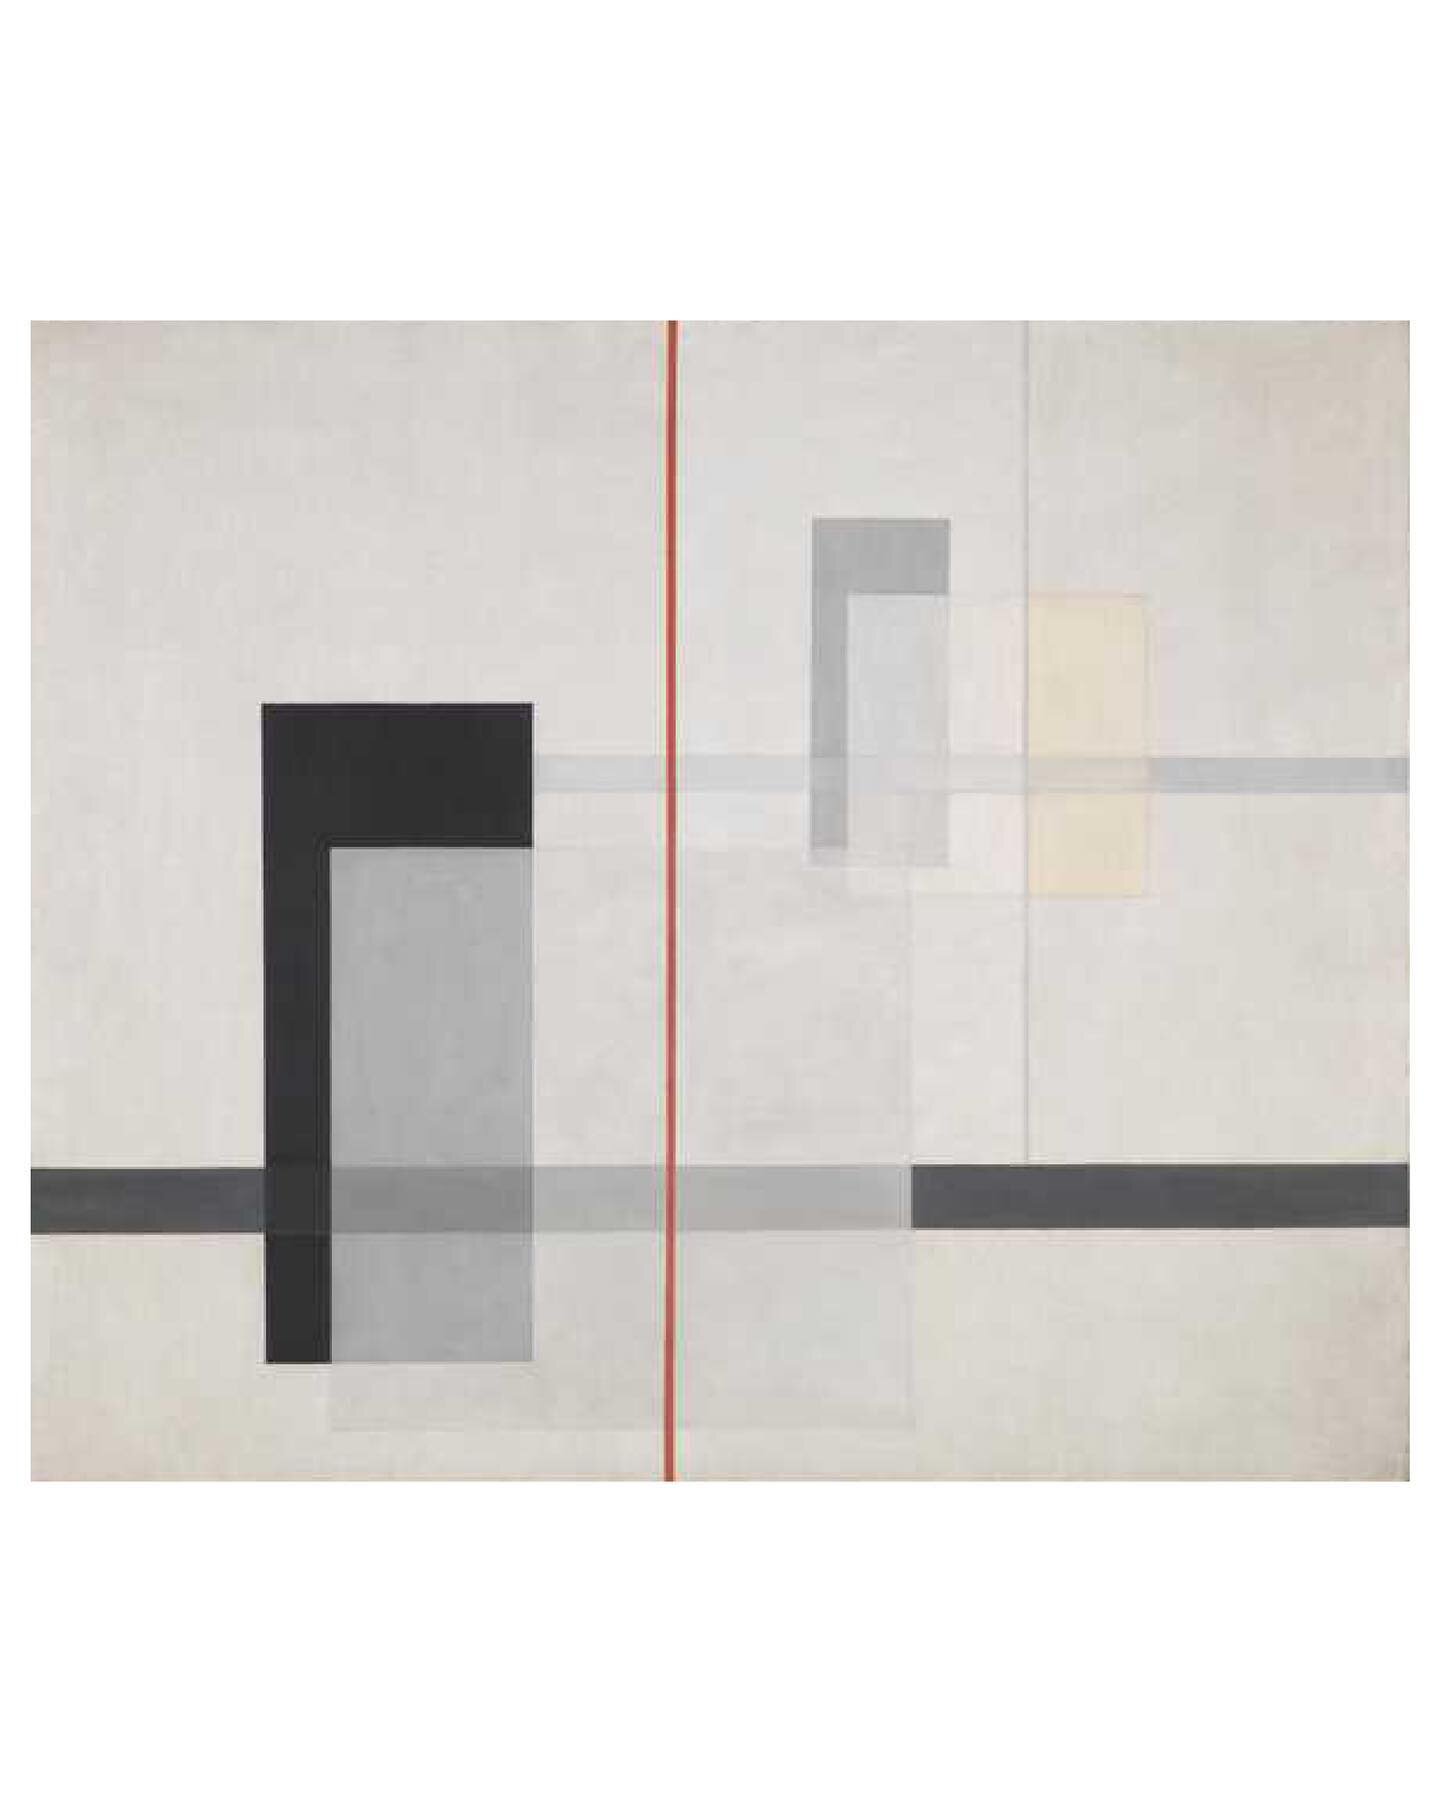 Color Reference: L&aacute;szlo Moholgy-
Nagy, &bdquo;K VII&quot;, 1922

L&aacute;szl&oacute; Moholy-Nagy (1895-1946) was a Hungarian painter, photographer, and Bauhaus professor known for his pioneering work in various art forms. Moholy-Nagy's design